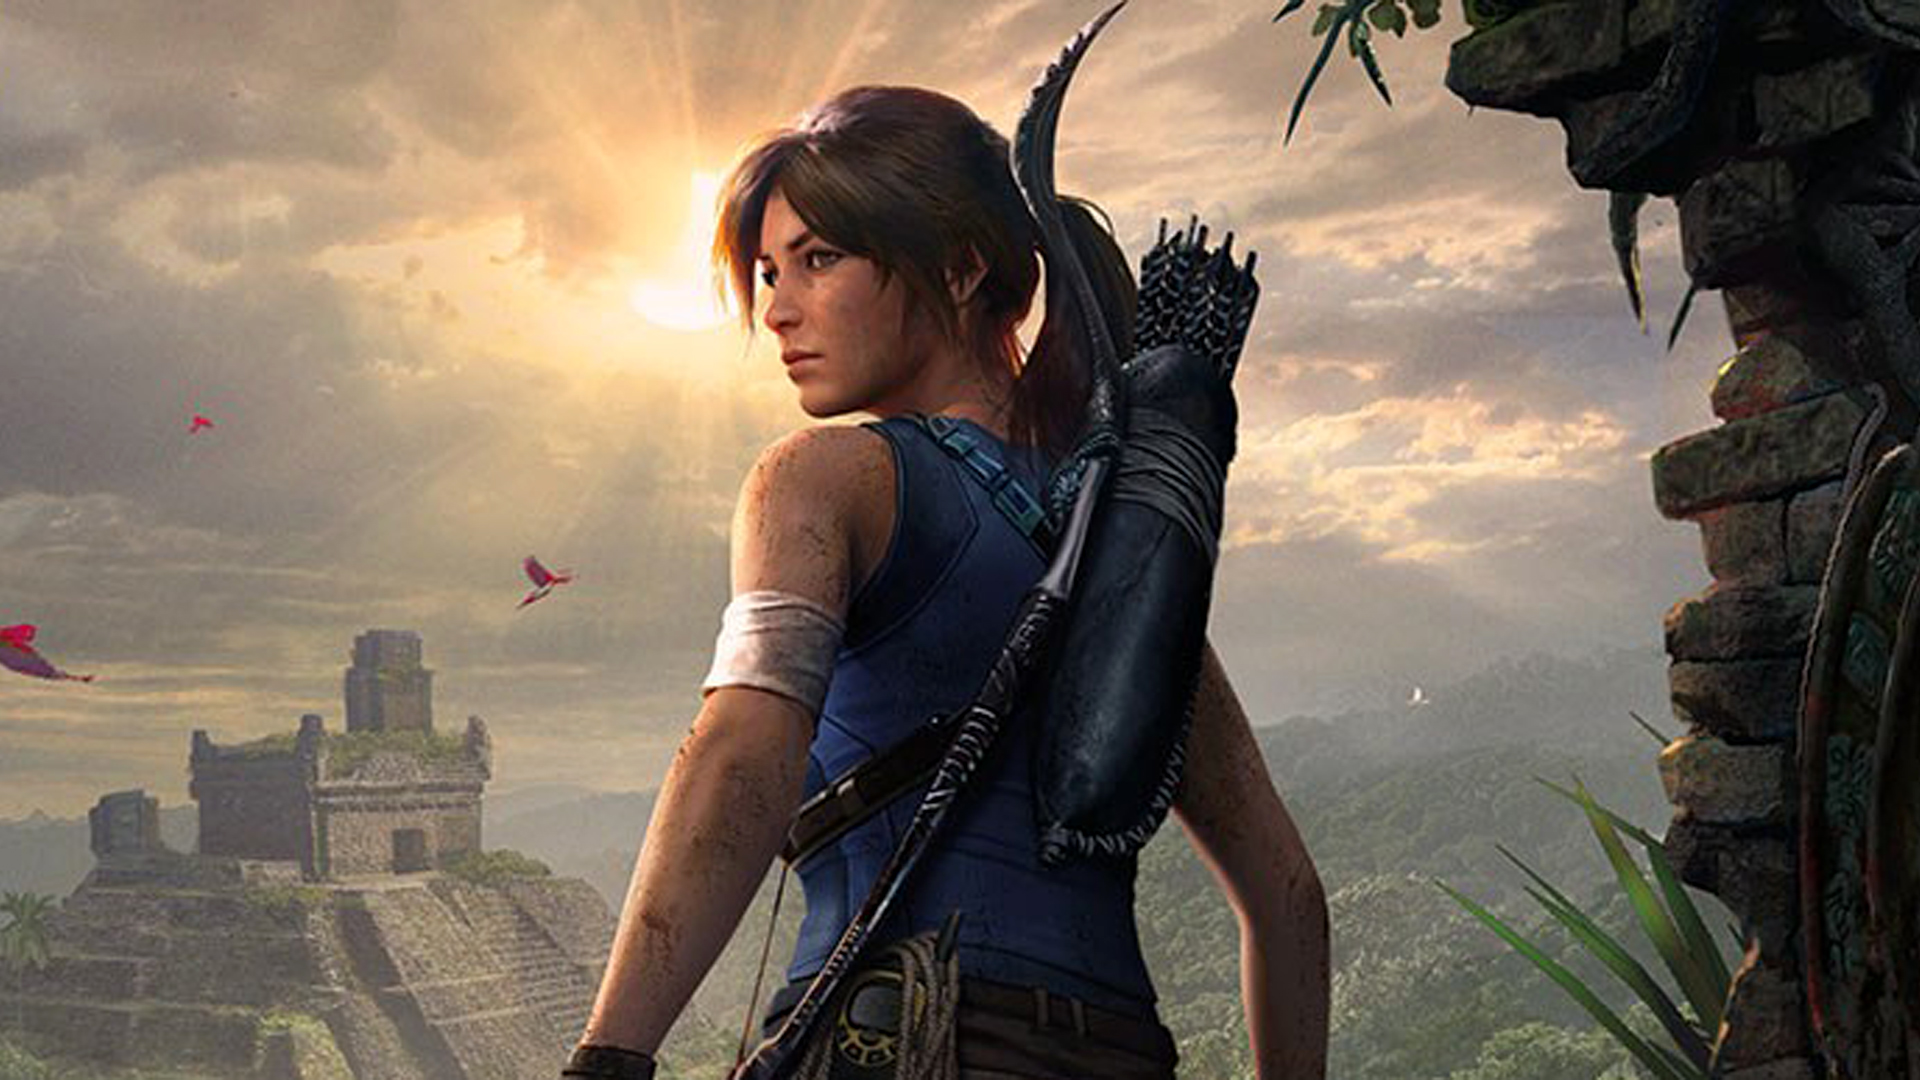 Ghost Recon’s 20th anniversary includes a Tomb Raider crossover in Breakpoint